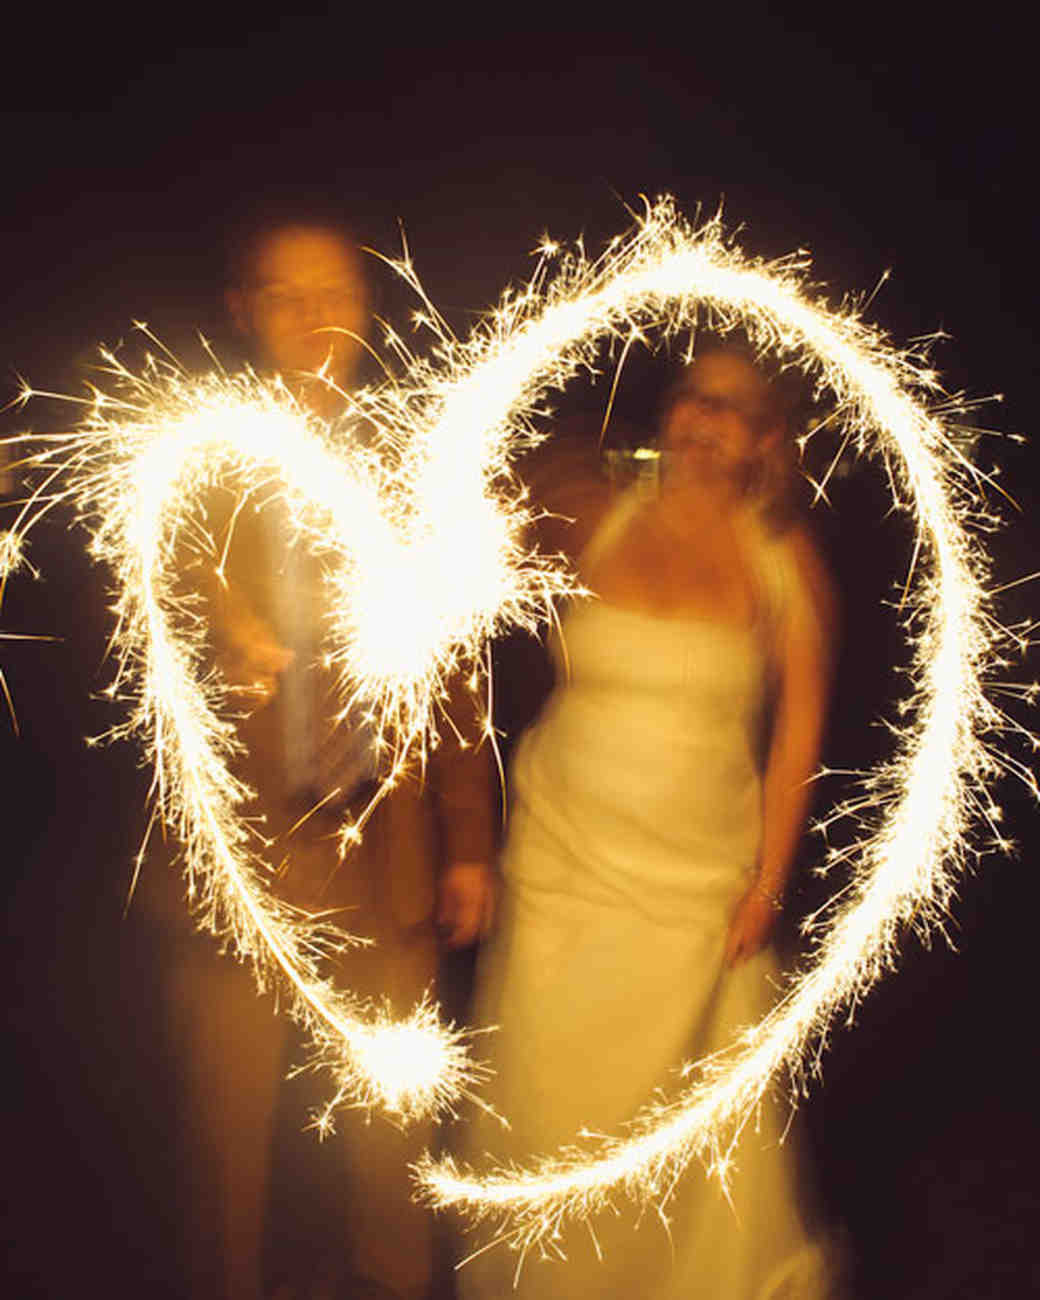 Heart Sparklers Wedding
 Amazing Fireworks and Sparklers from Real Weddings